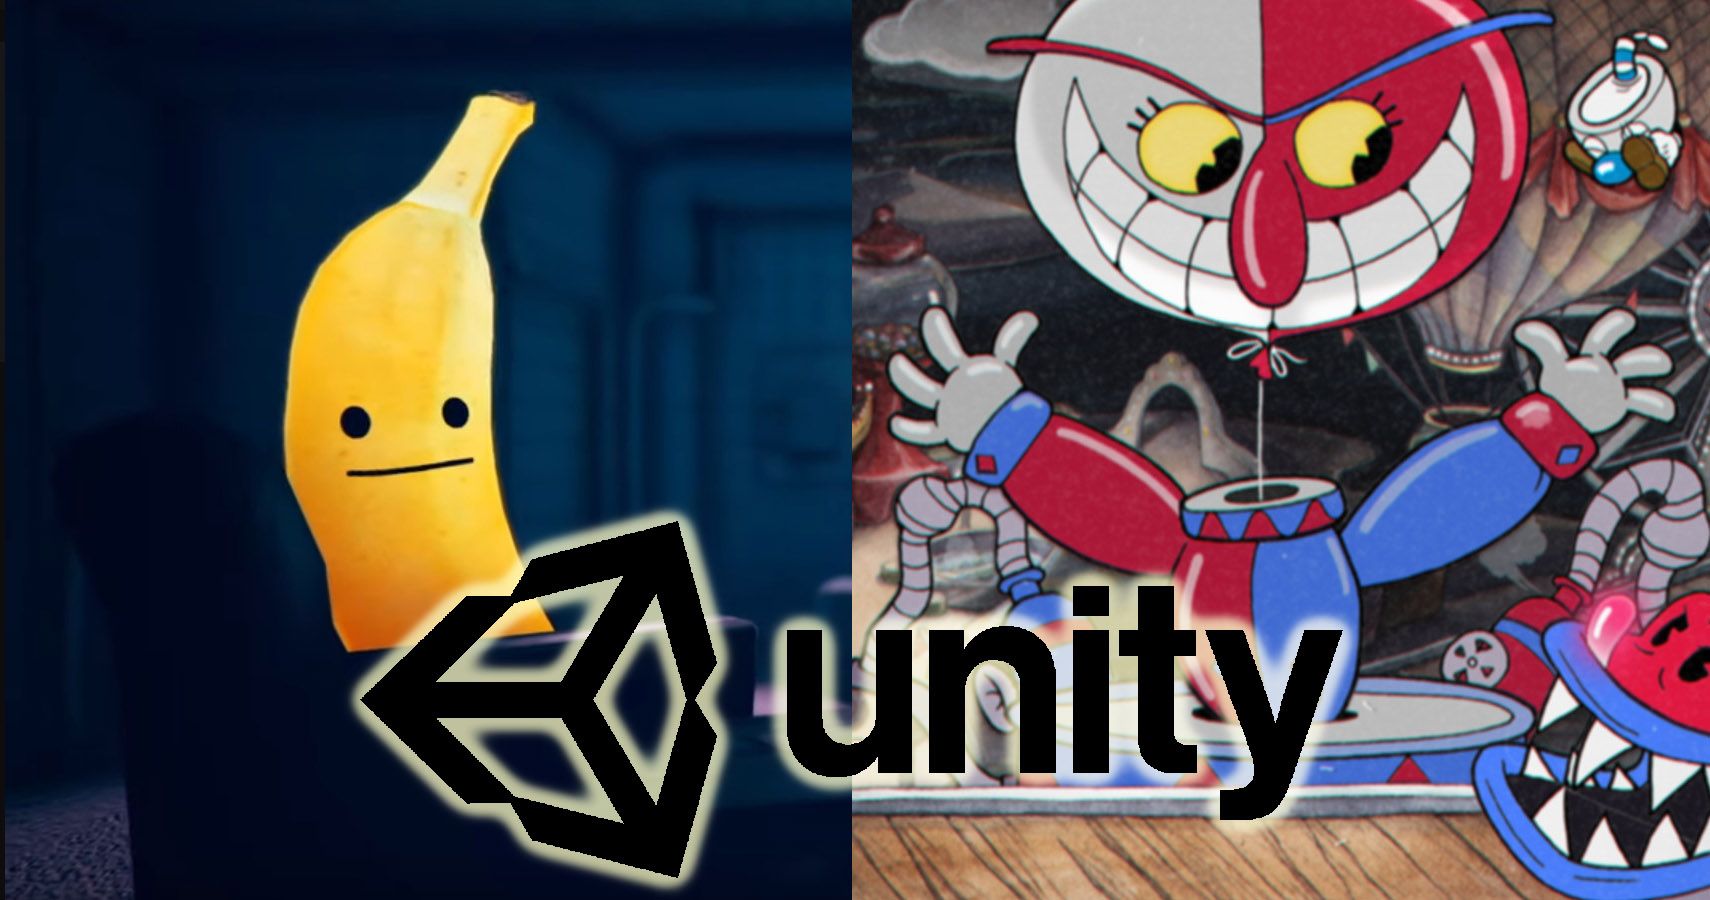 10 Great Games That Use The Unity Game Engine